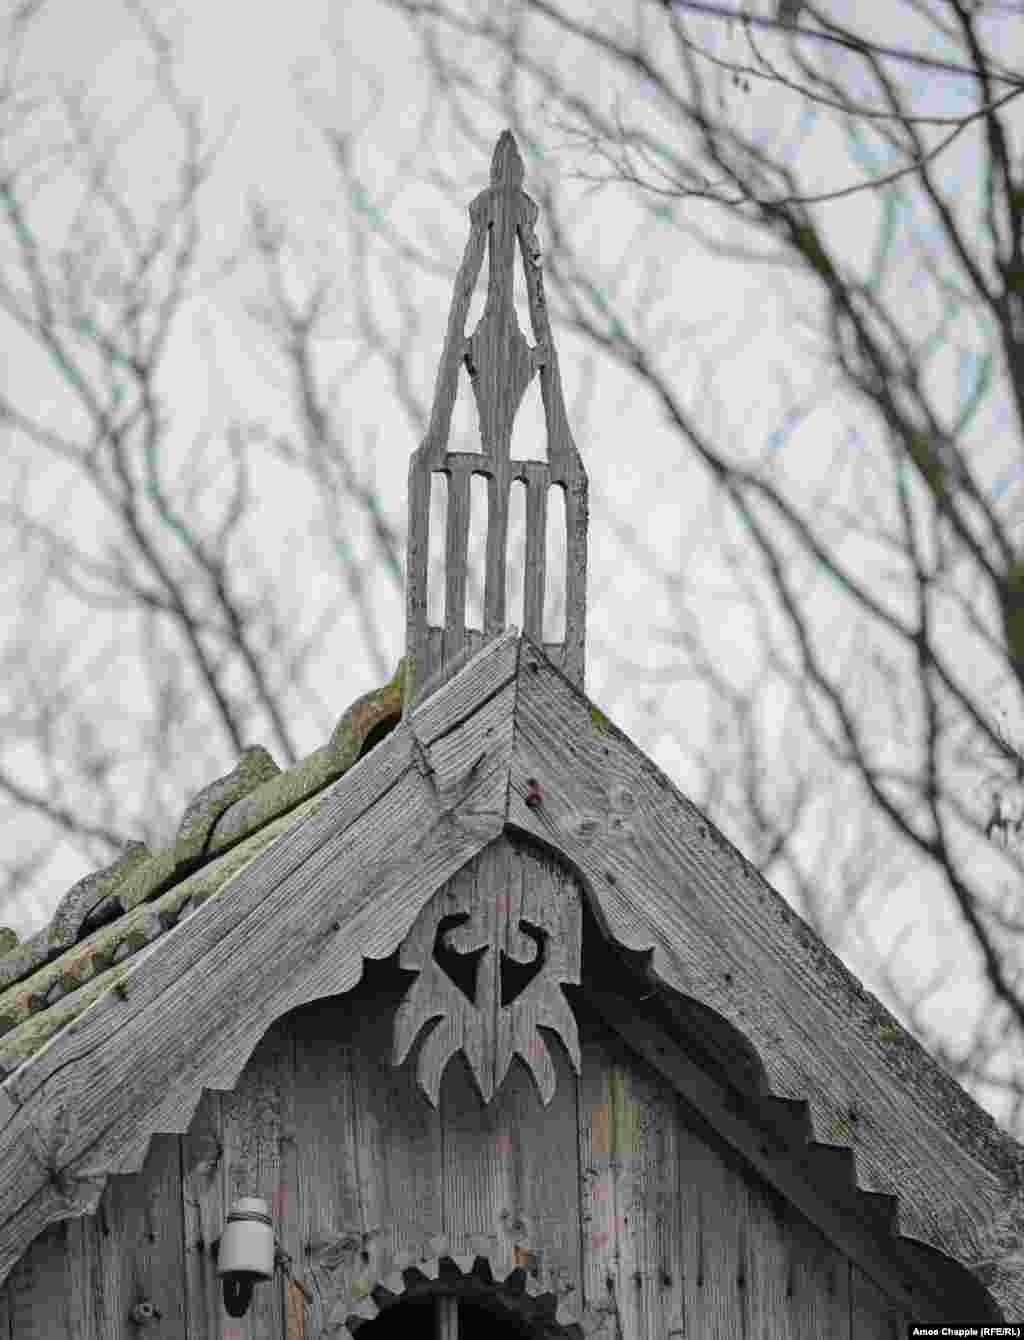 Anatolivetch says houses were built by teams who, during the construction process, placed a simple wooden cross on the gable to bless the project. Once the house was complete, a more elaborate &quot;spear&quot; carved by a local craftsman took the place of the cross.